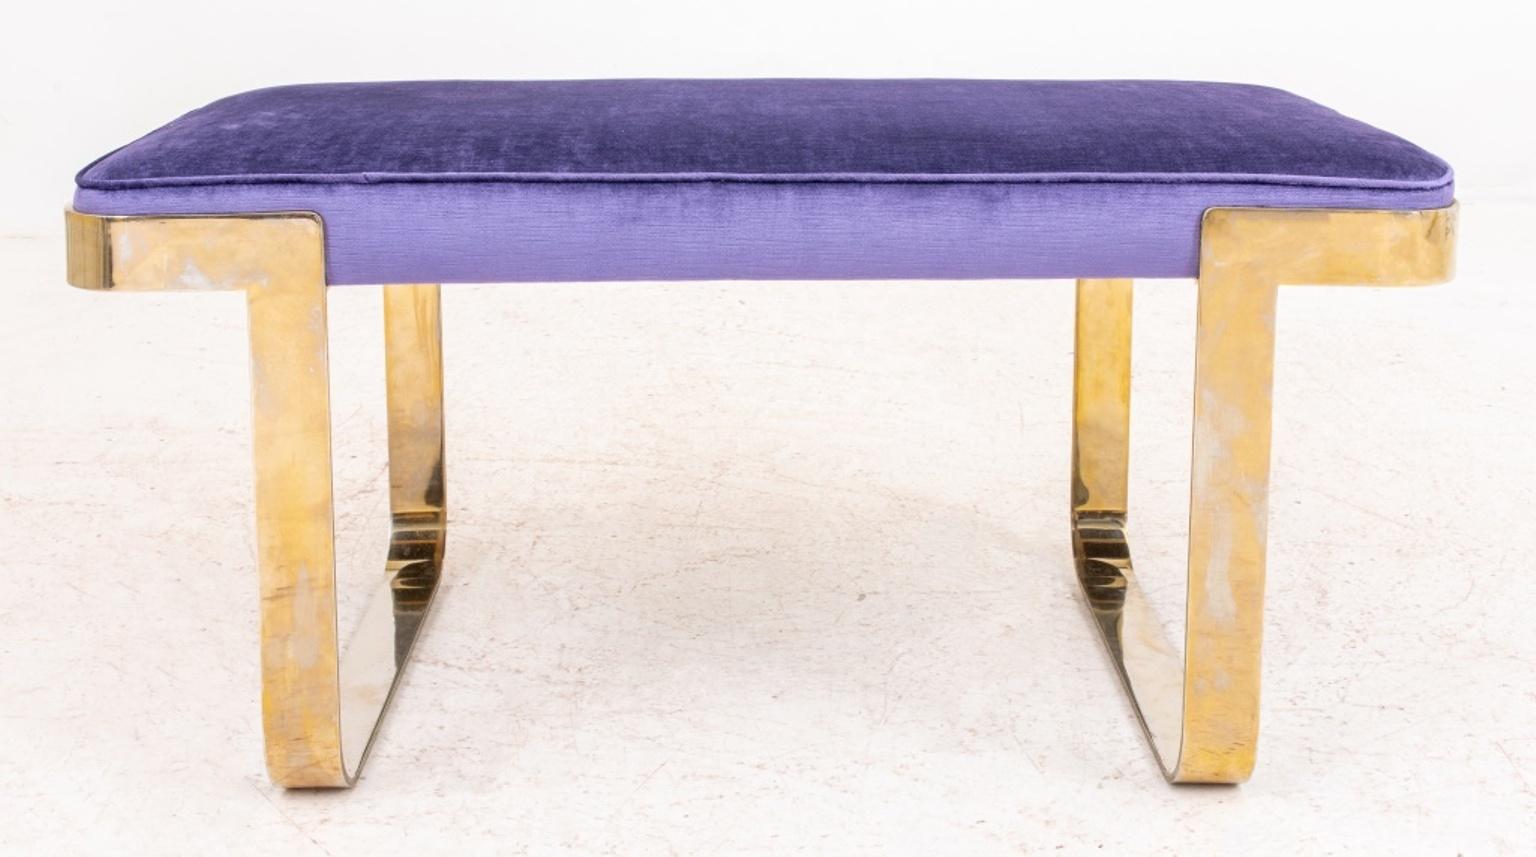 Milo Baughman (American, 1923-2003) style chrome bench rectangular with chrome frame and trestle supports, upholstered in violet velours. Measures: 17